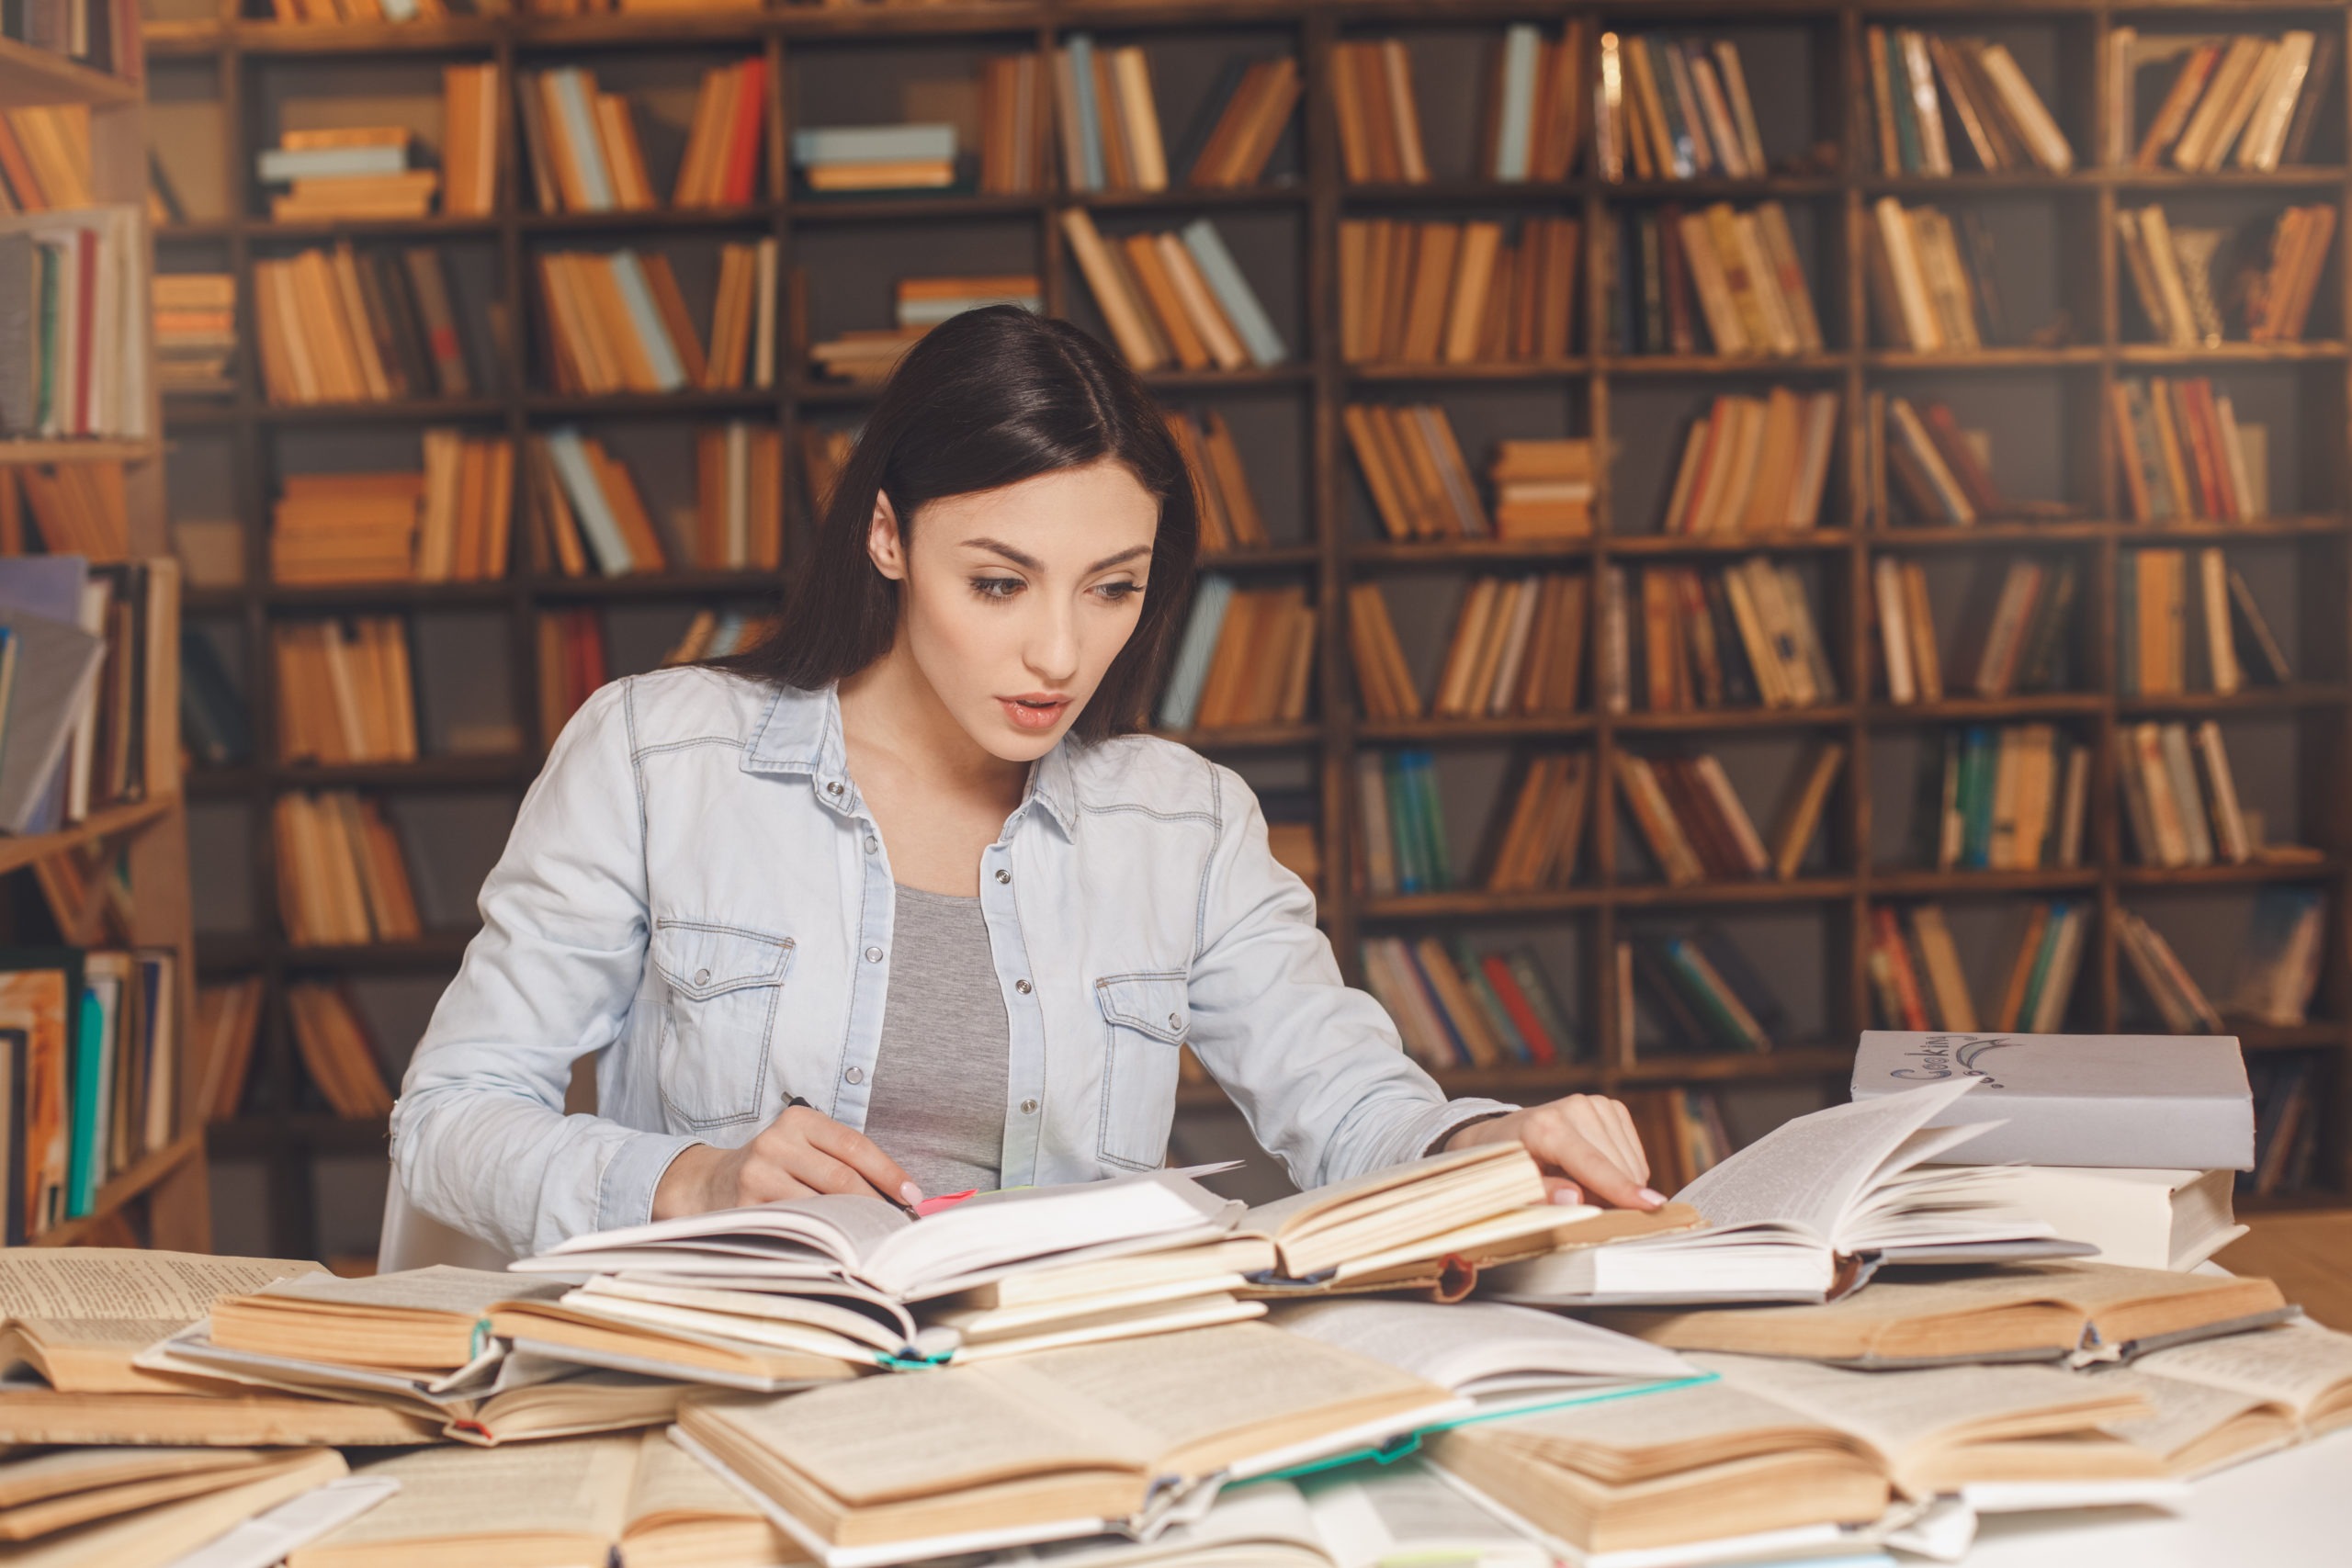 Young woman study in the library alone, books scattered on the table